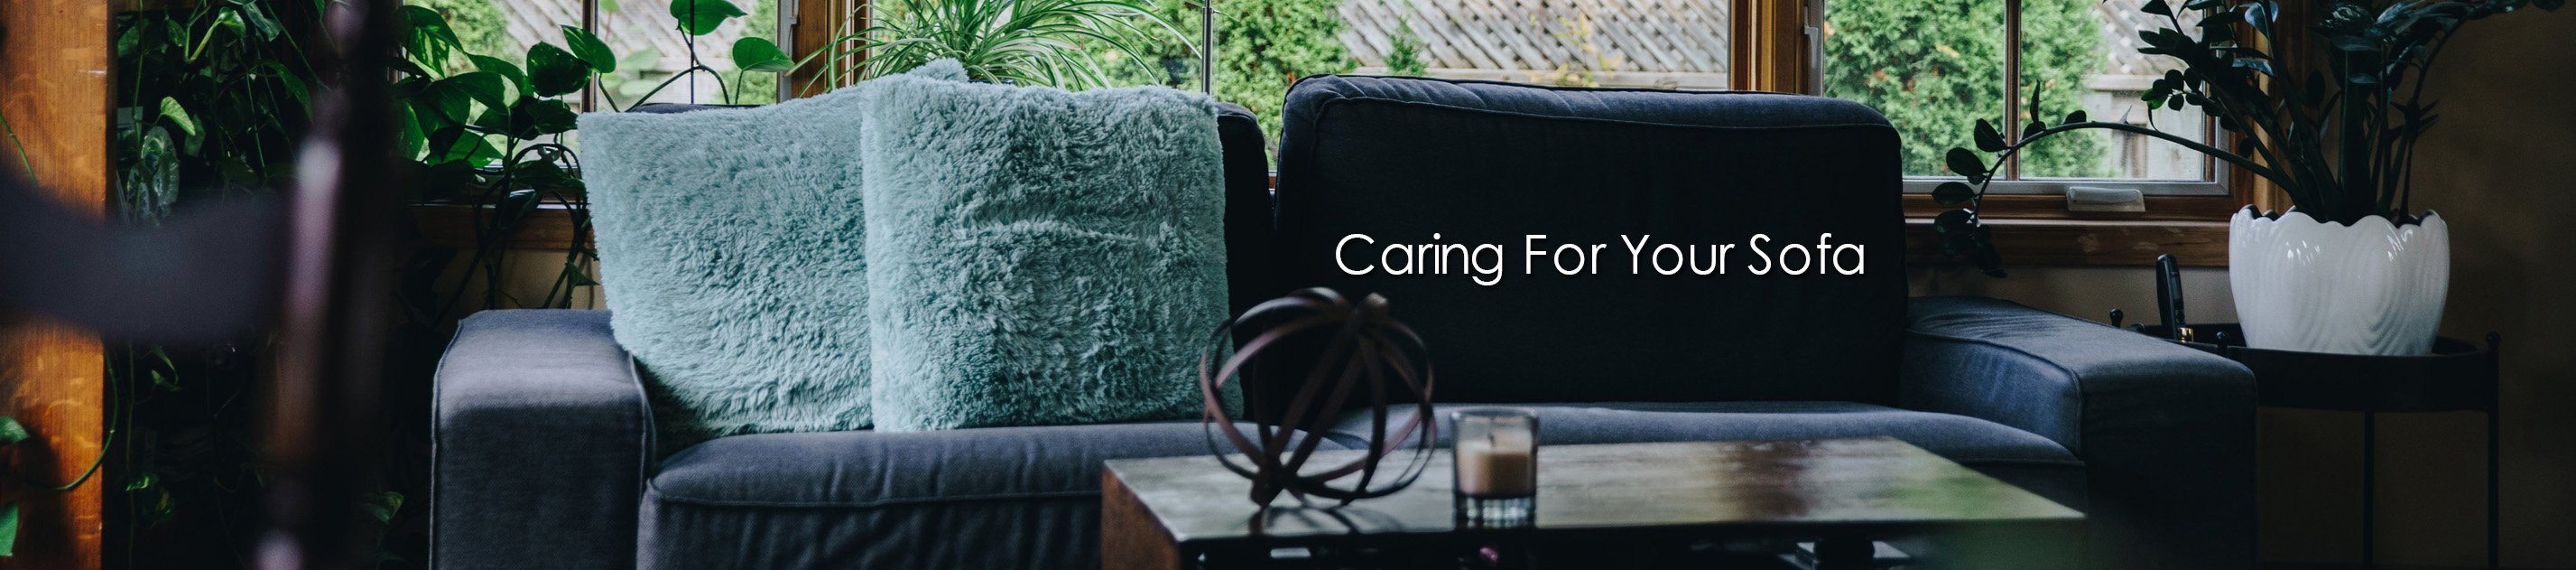 Caring for your sofa